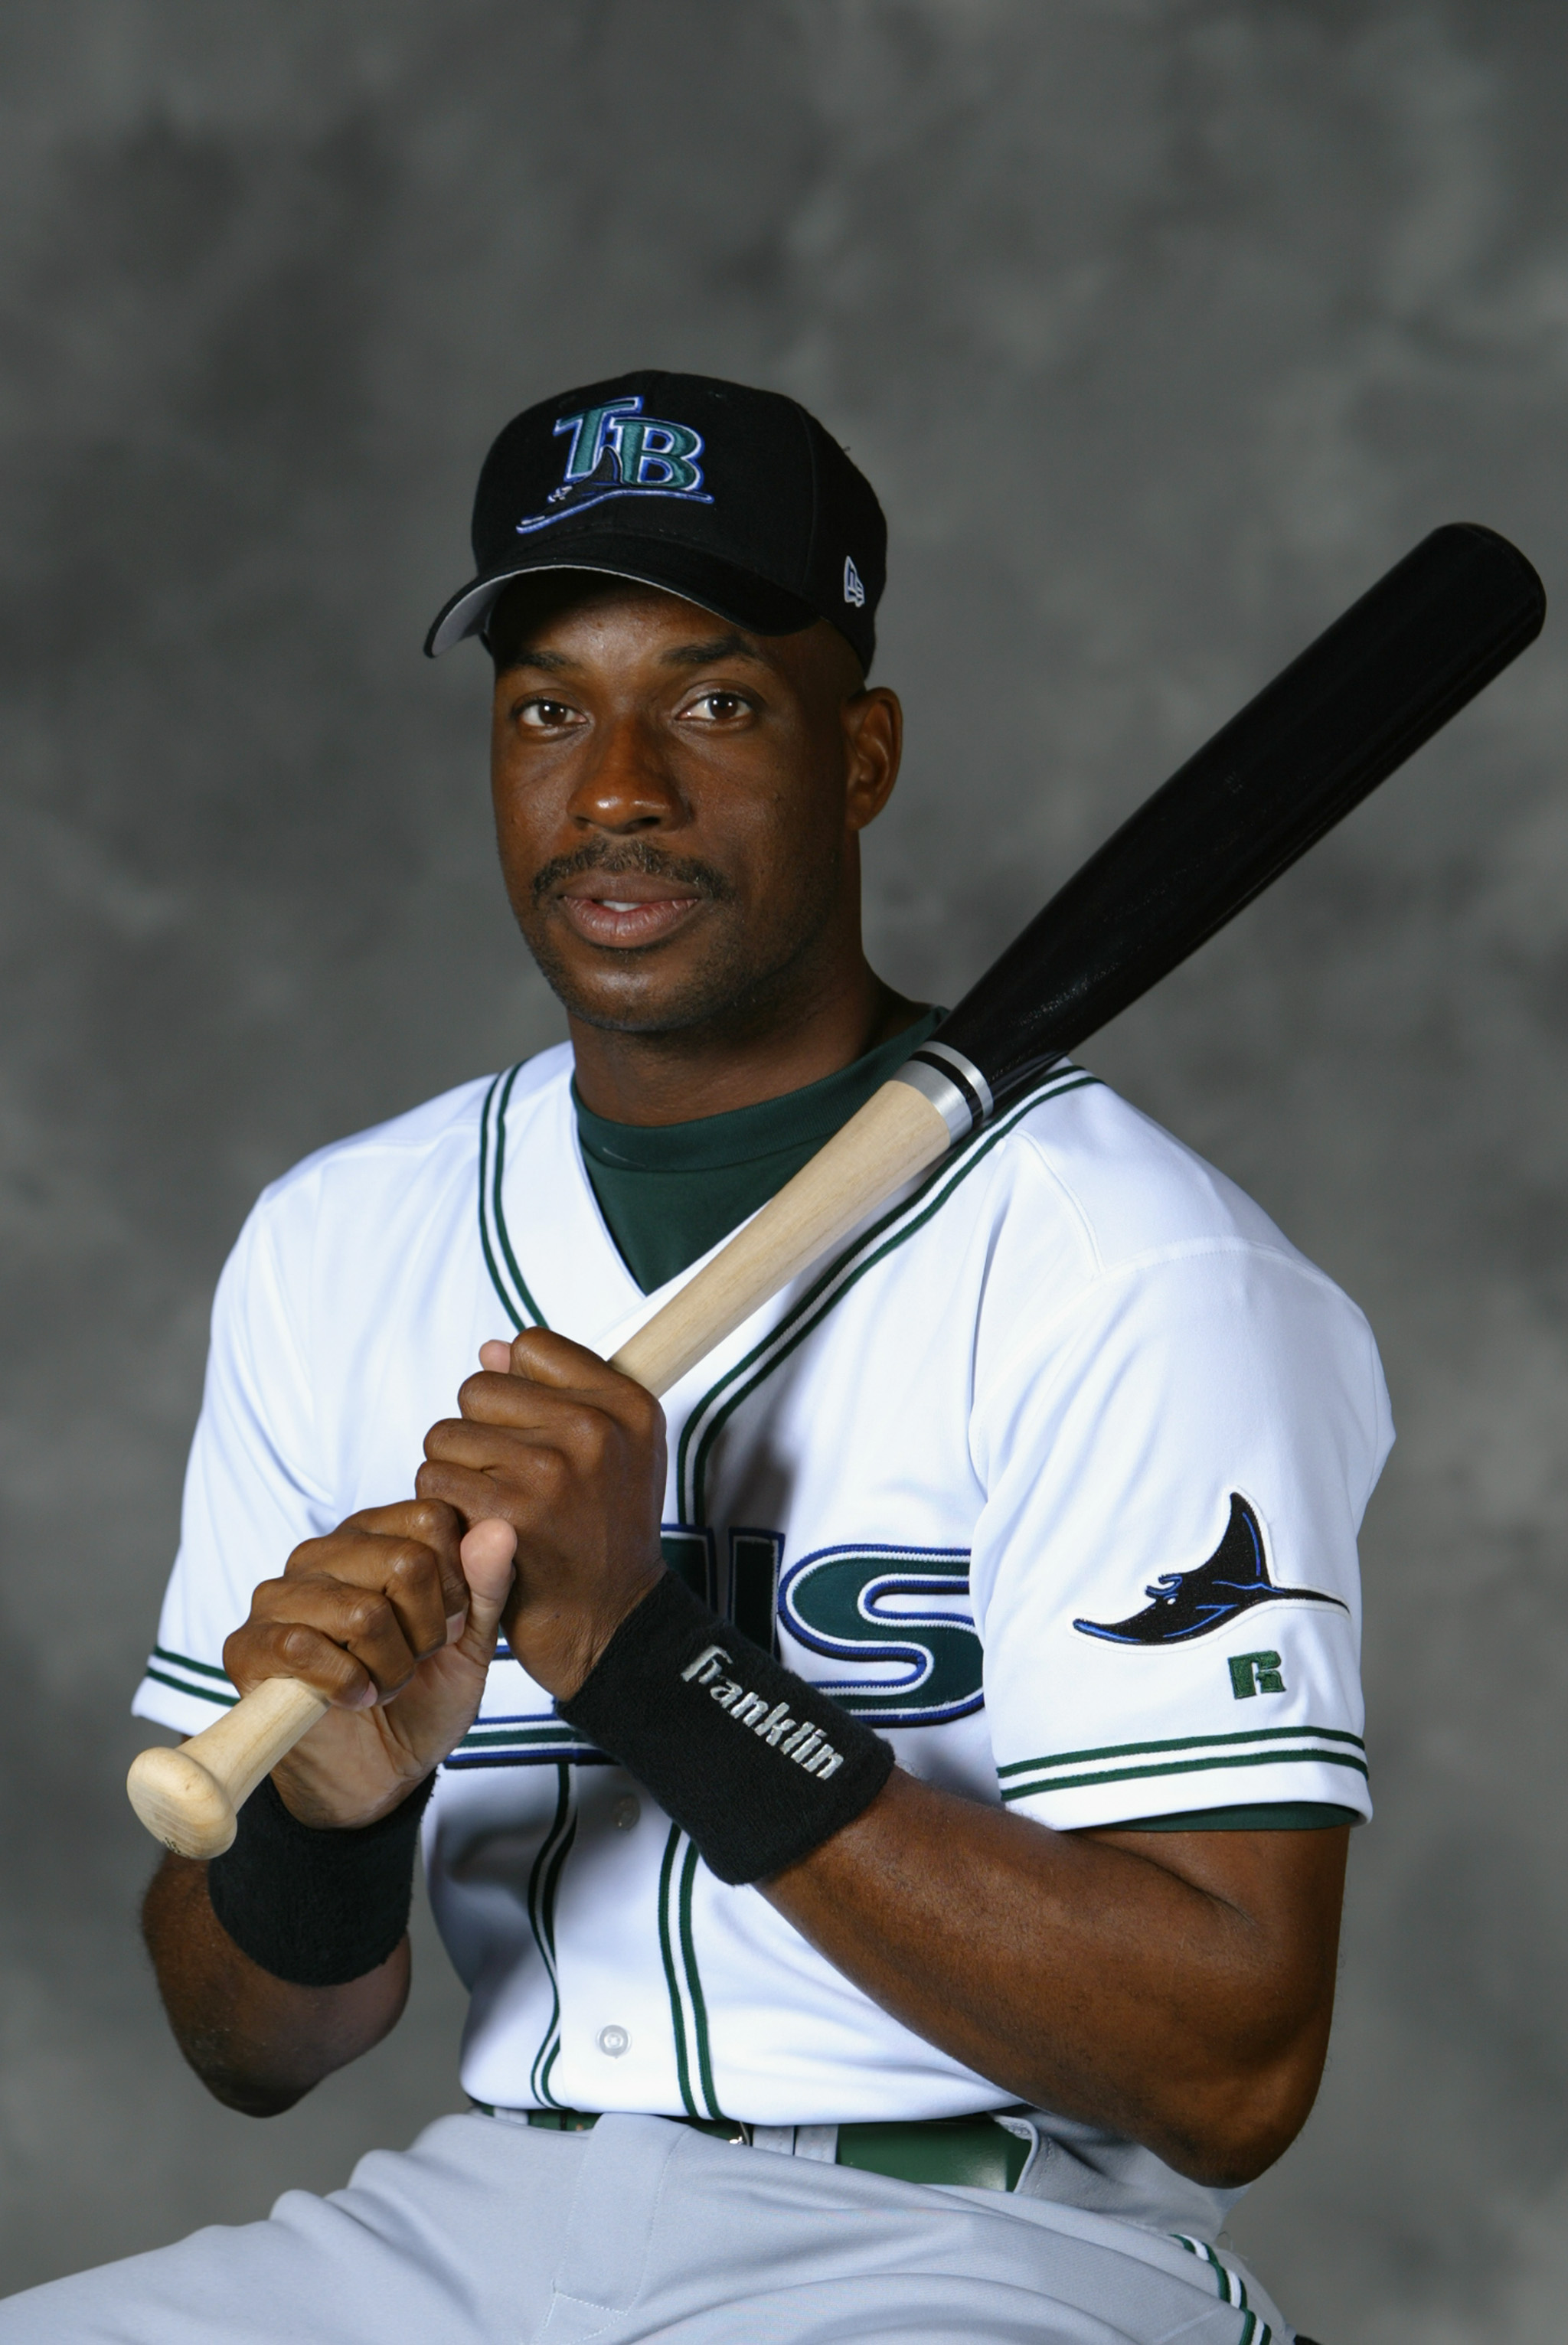 ST. PETERSBURG, FL - FEBRUARY 23:  Fred McGriff #29 of the Tampa Bay Devil Rays poses for a portrait on February 23, 2004 at the Devil Rays spring training complex in St. Petersburg, Florida.  (Photo by Ezra Shaw/Getty Images)